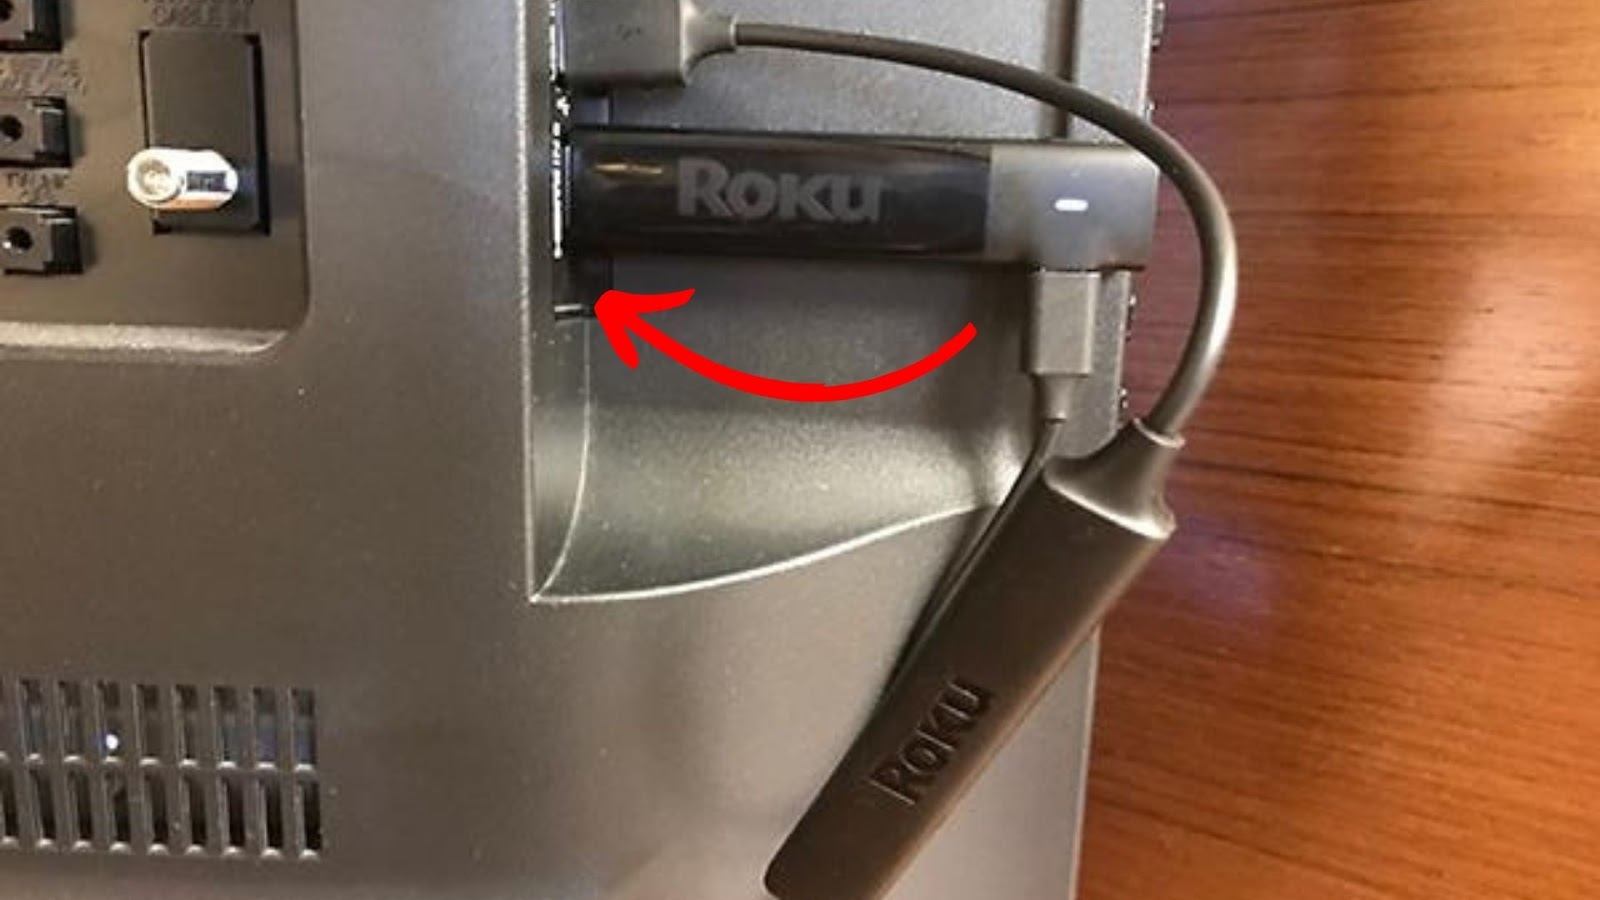 How to Power Your Roku TV Receiver Booster